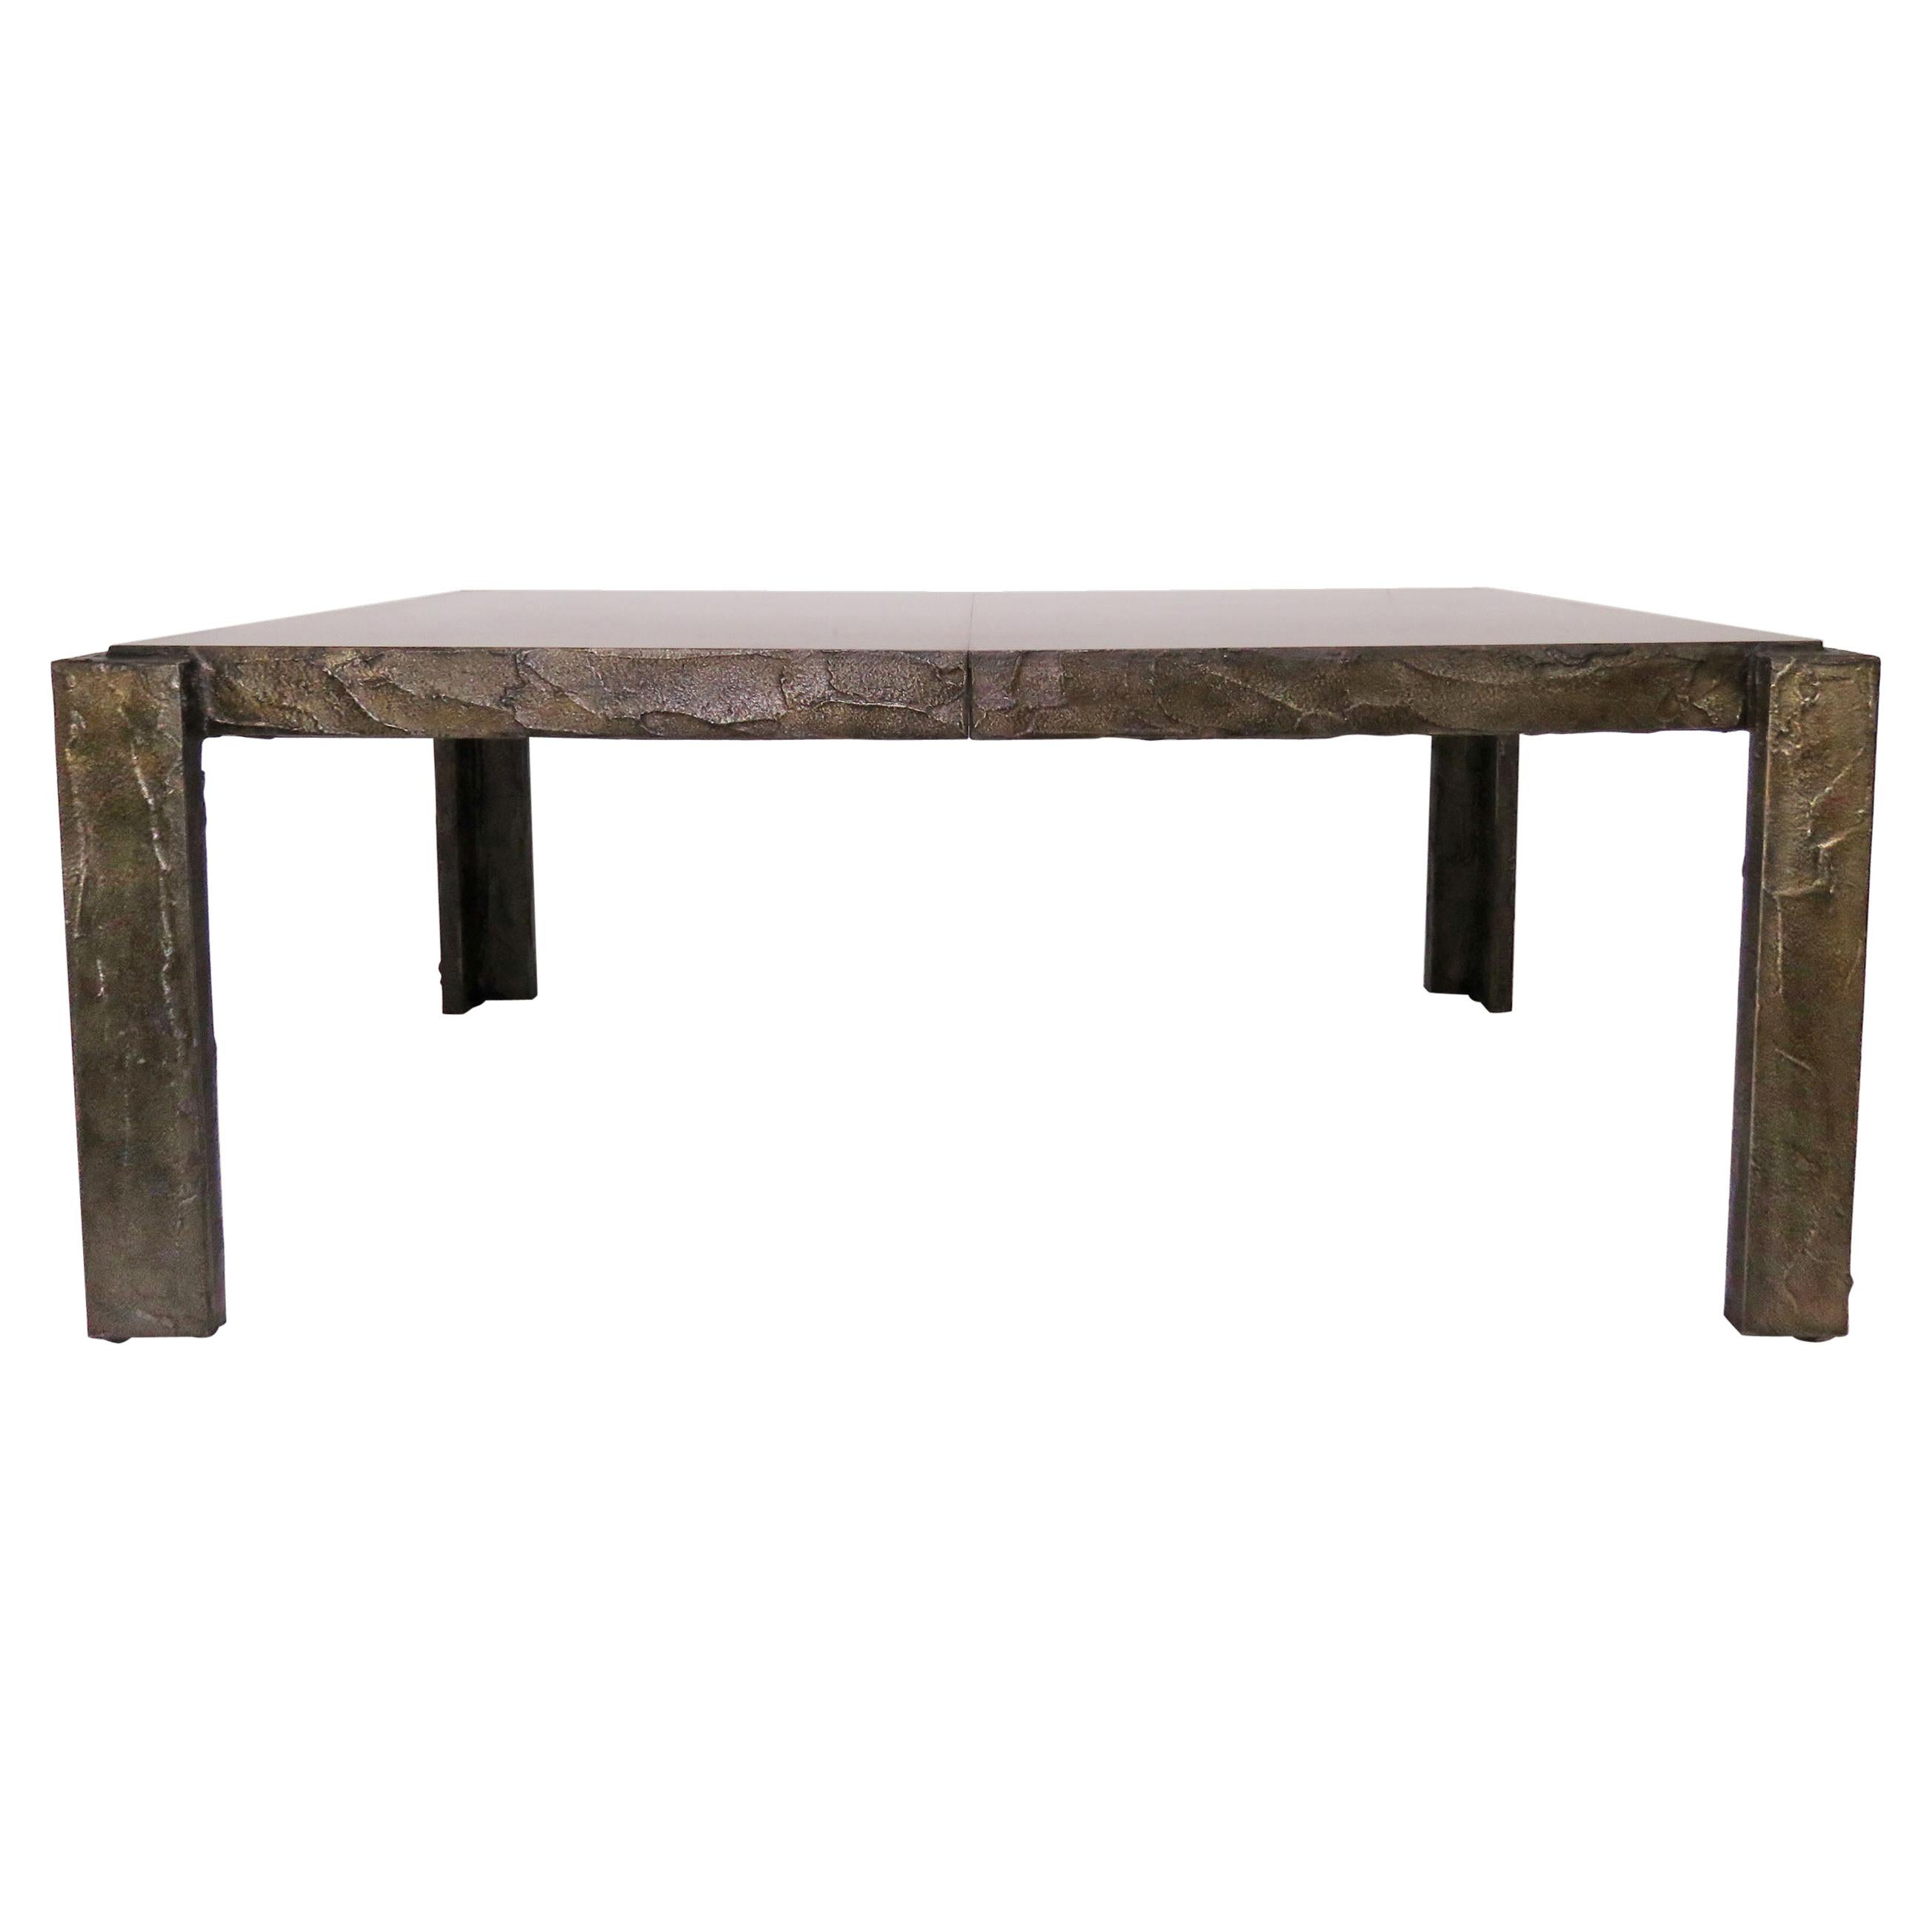 Paul Evans for Directional Brutalist Bronzed Sculpted Dining Table, circa 1970s